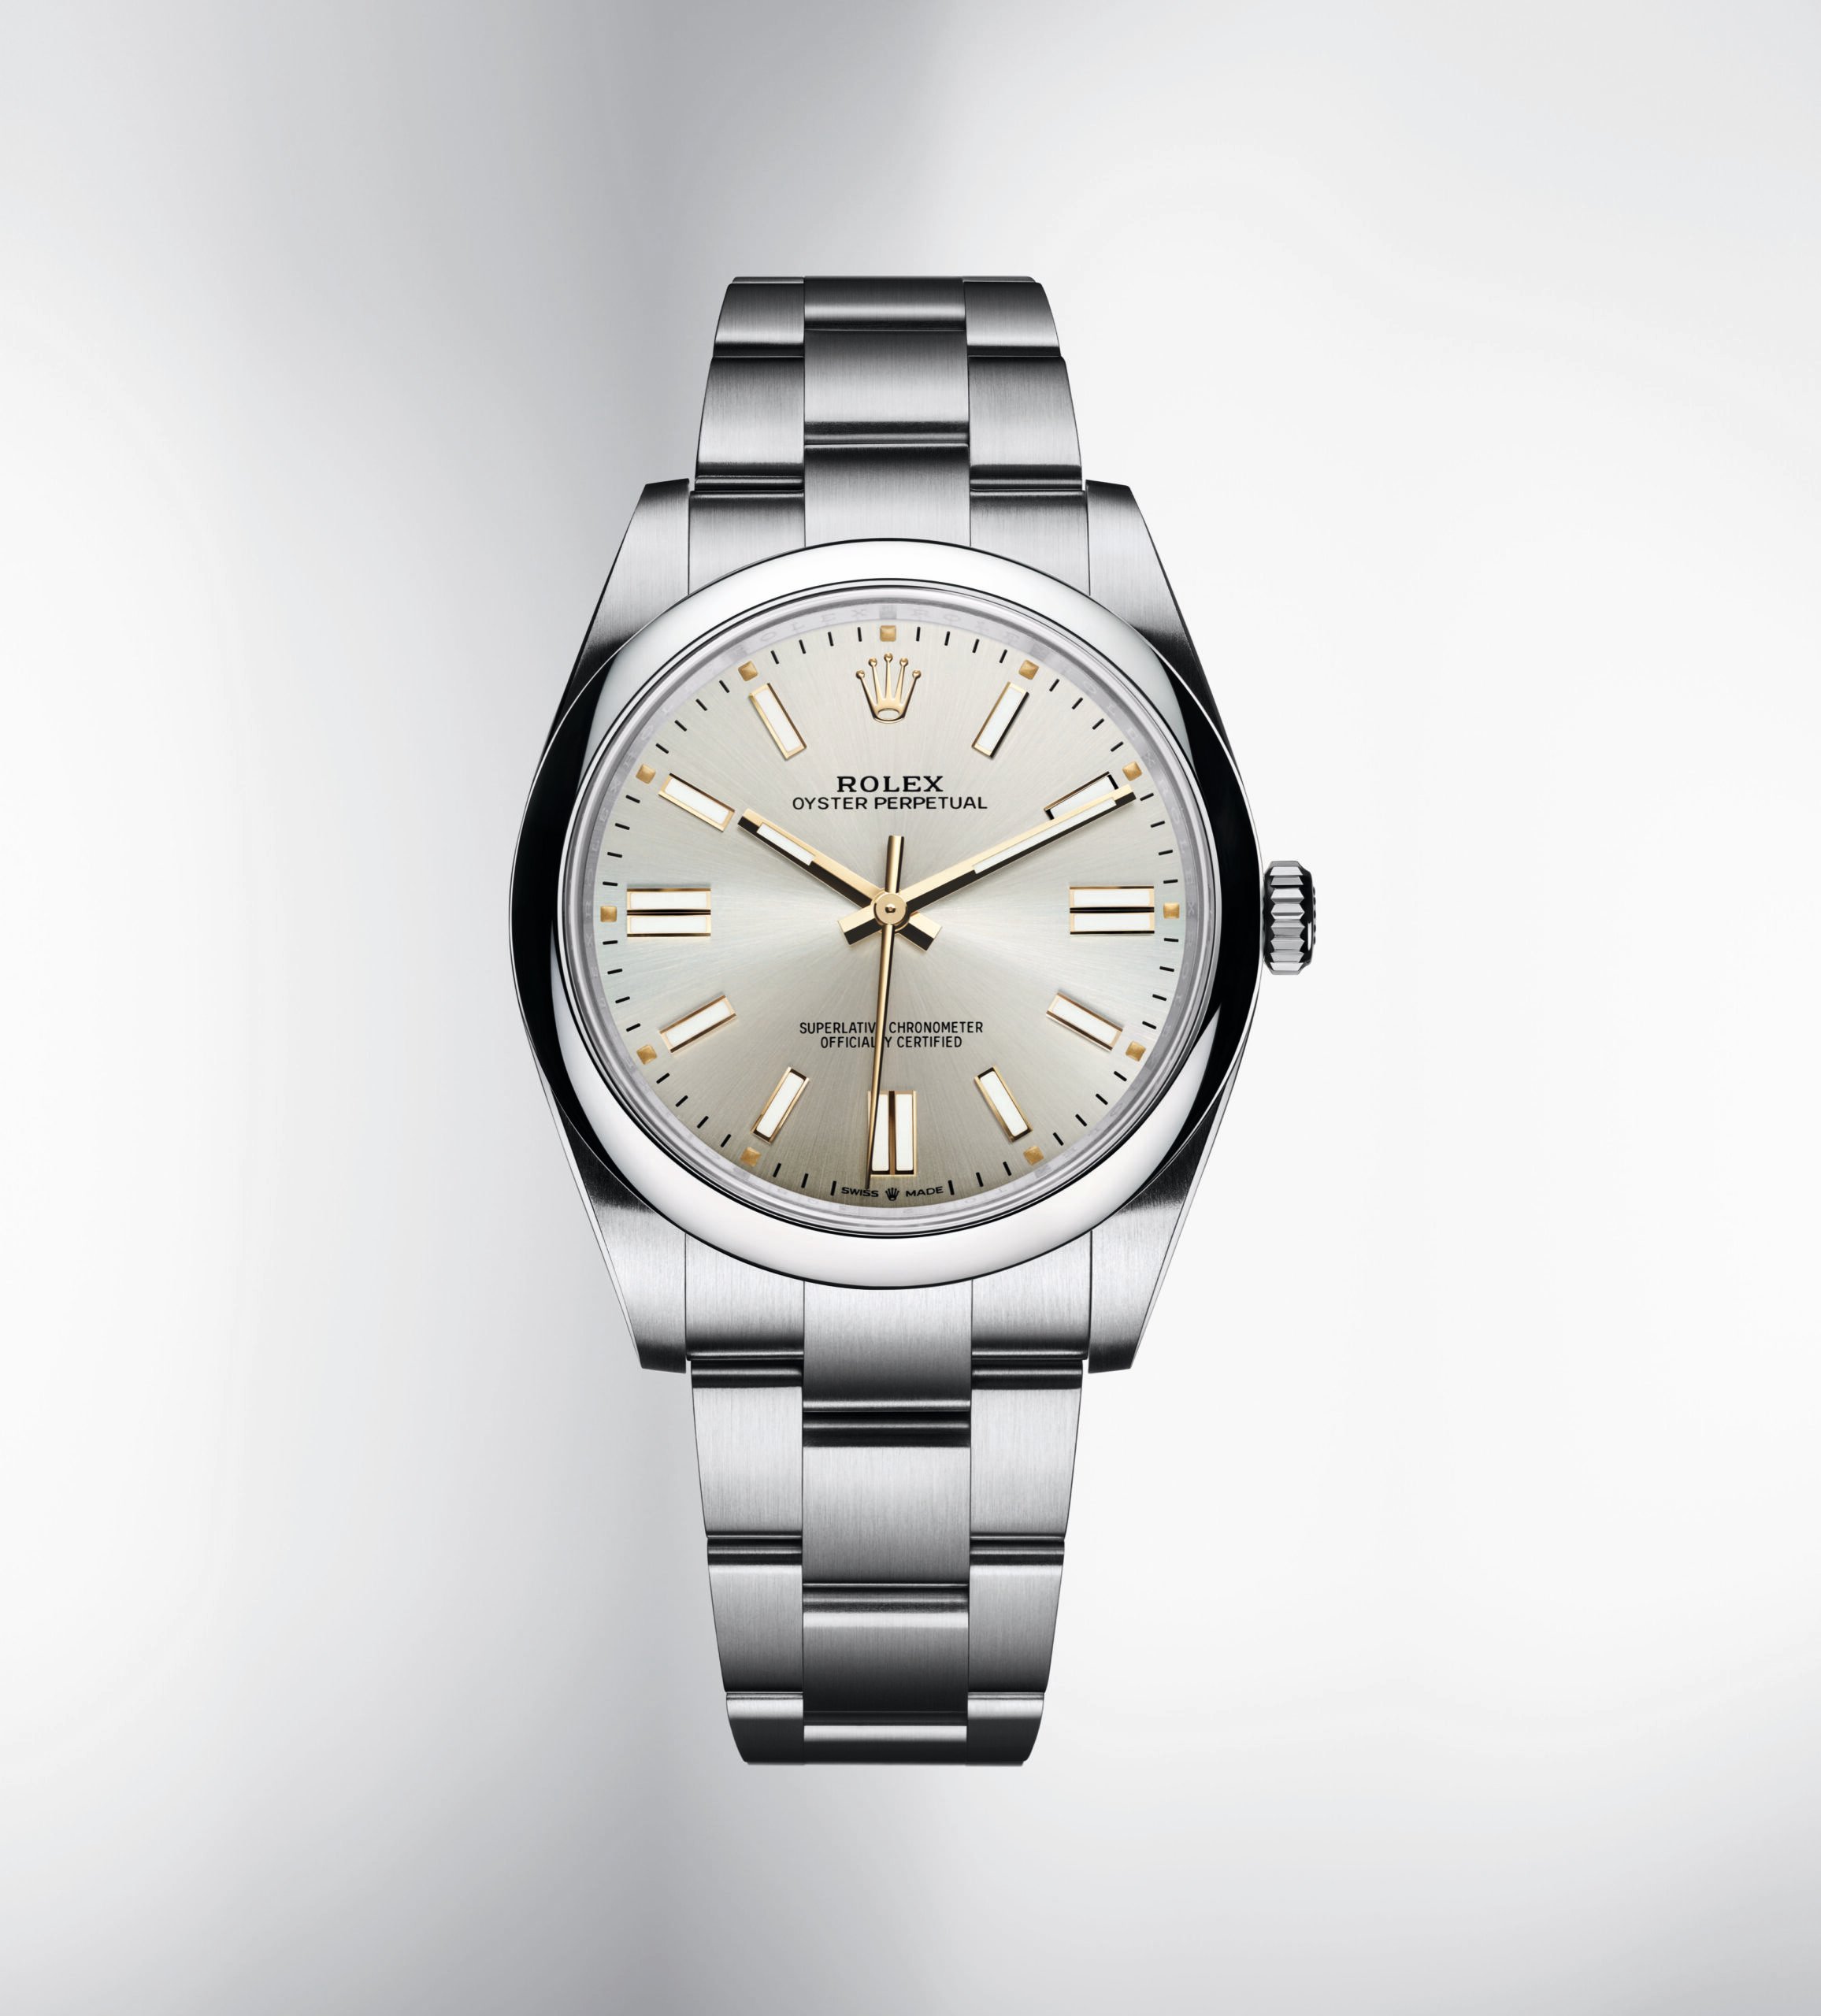 Rolex Oyster Perpetual silver dial